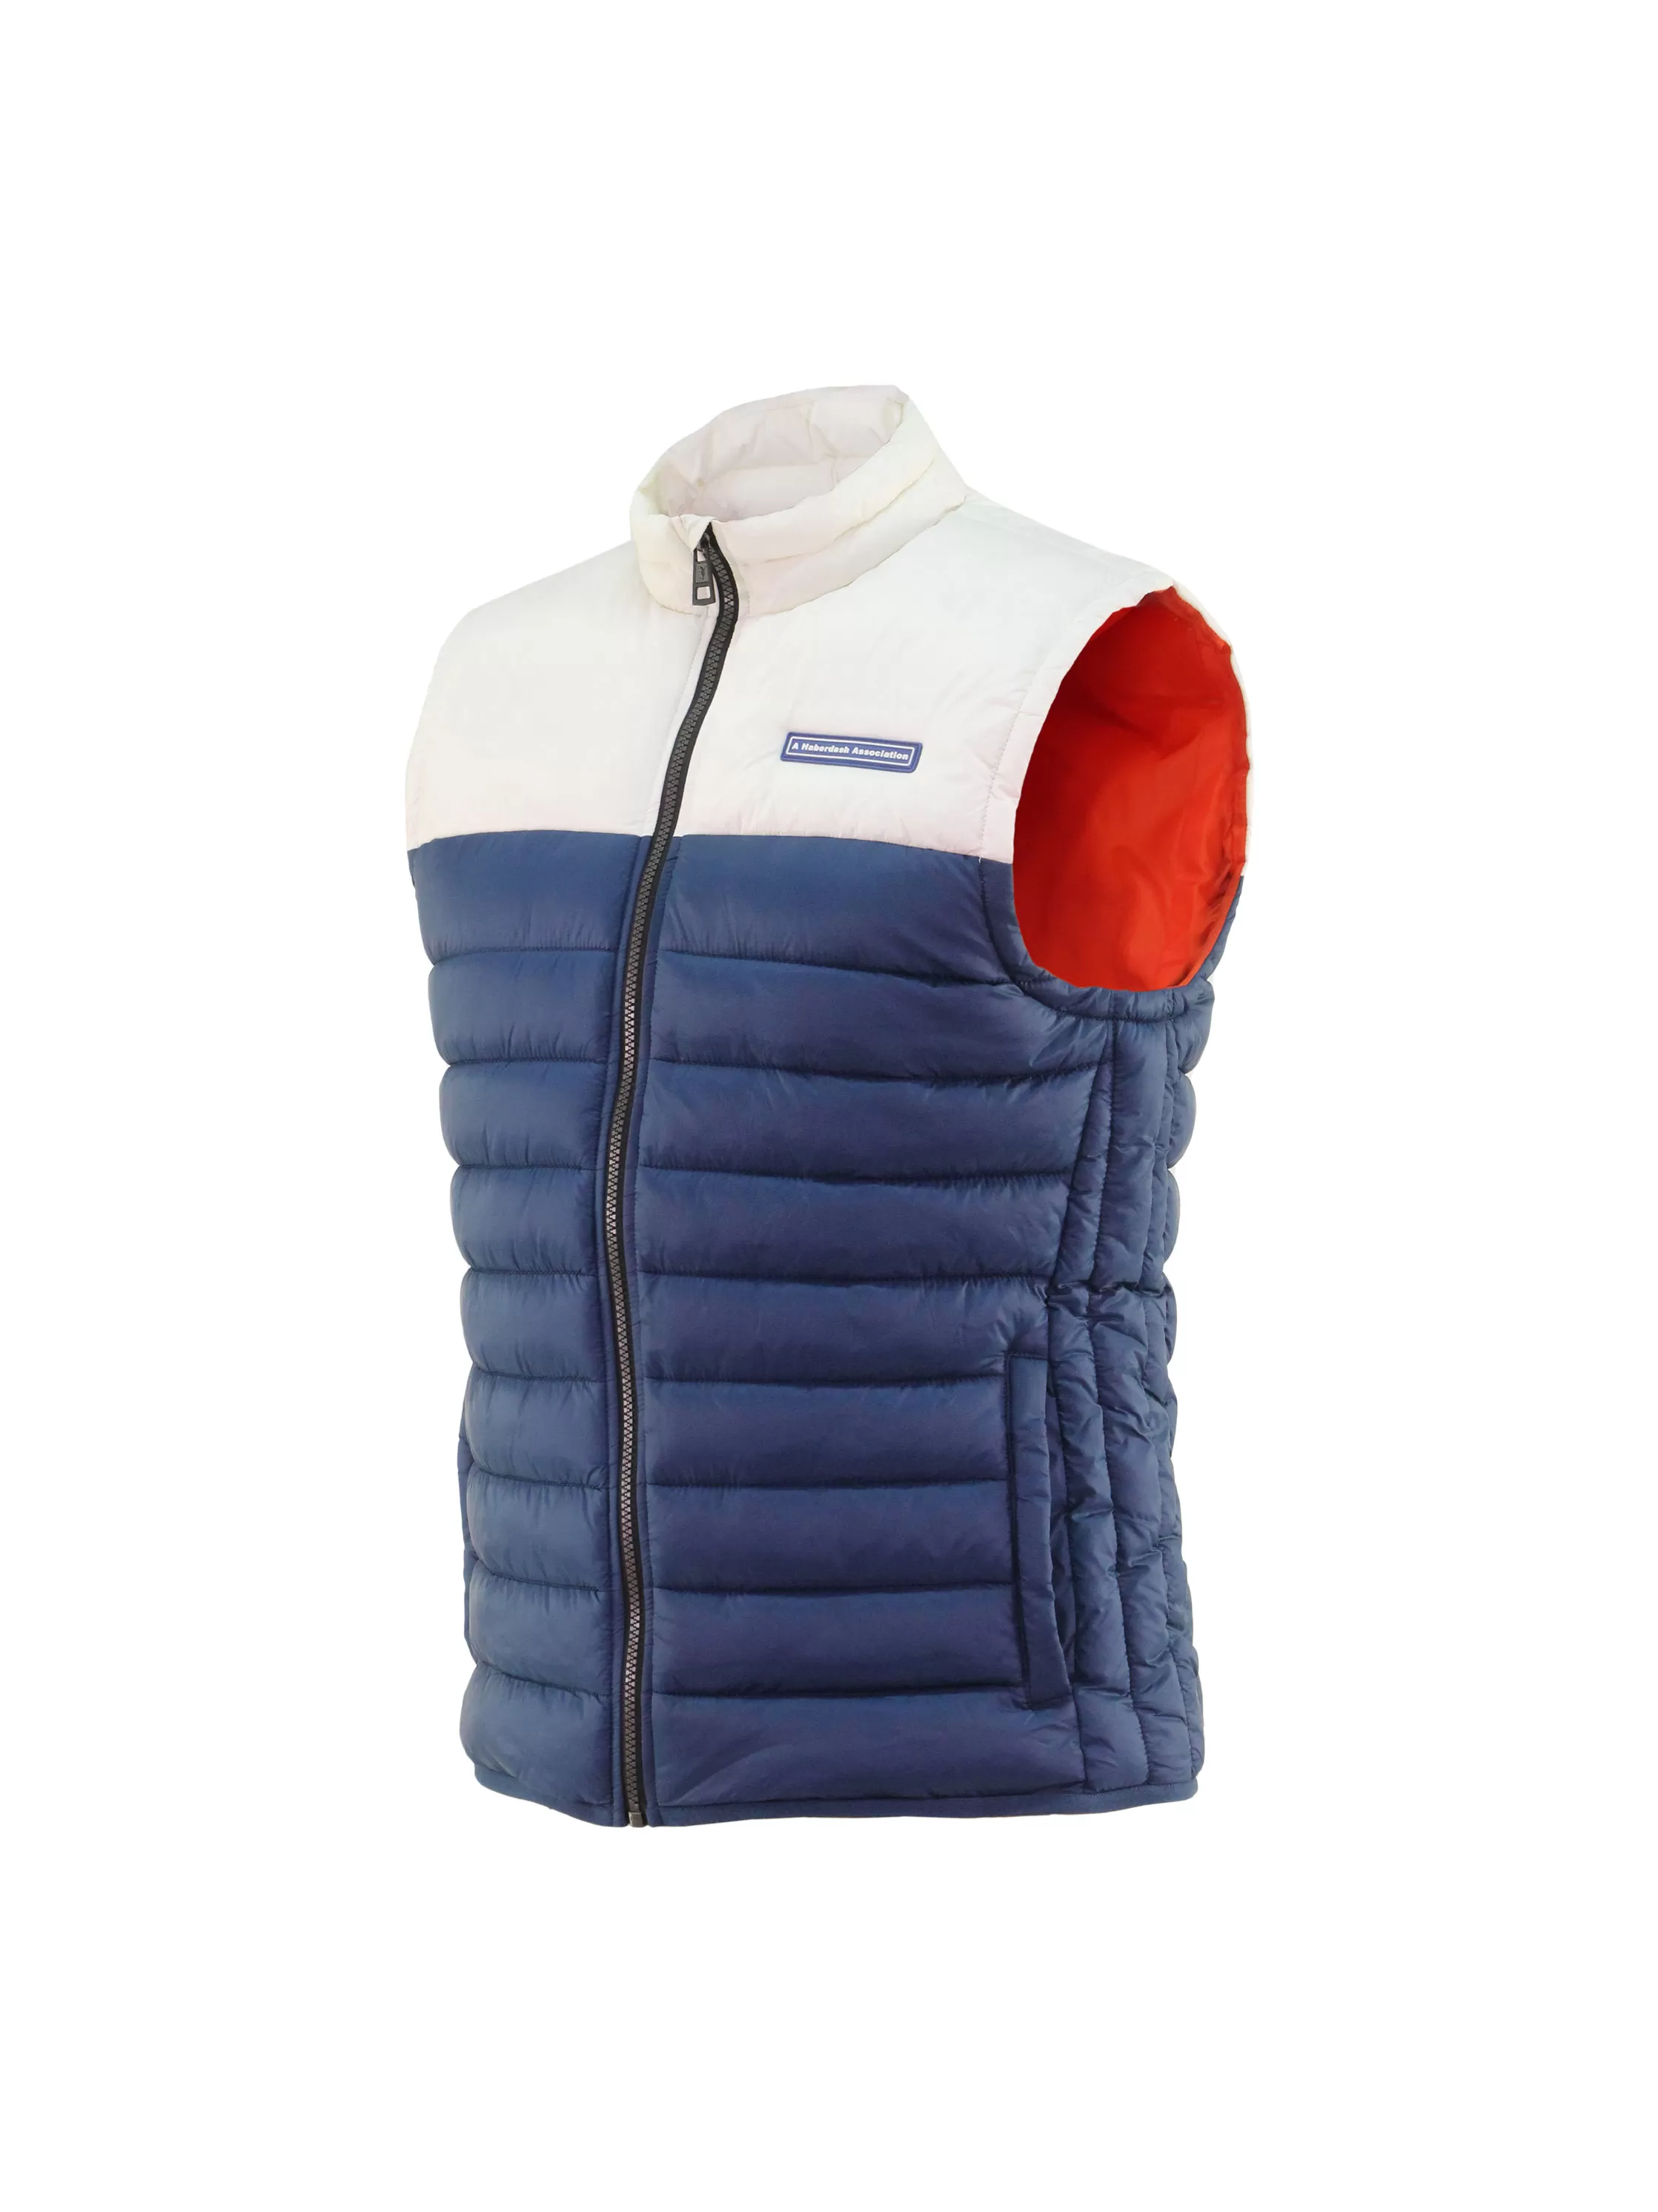 Vest - Front Angle